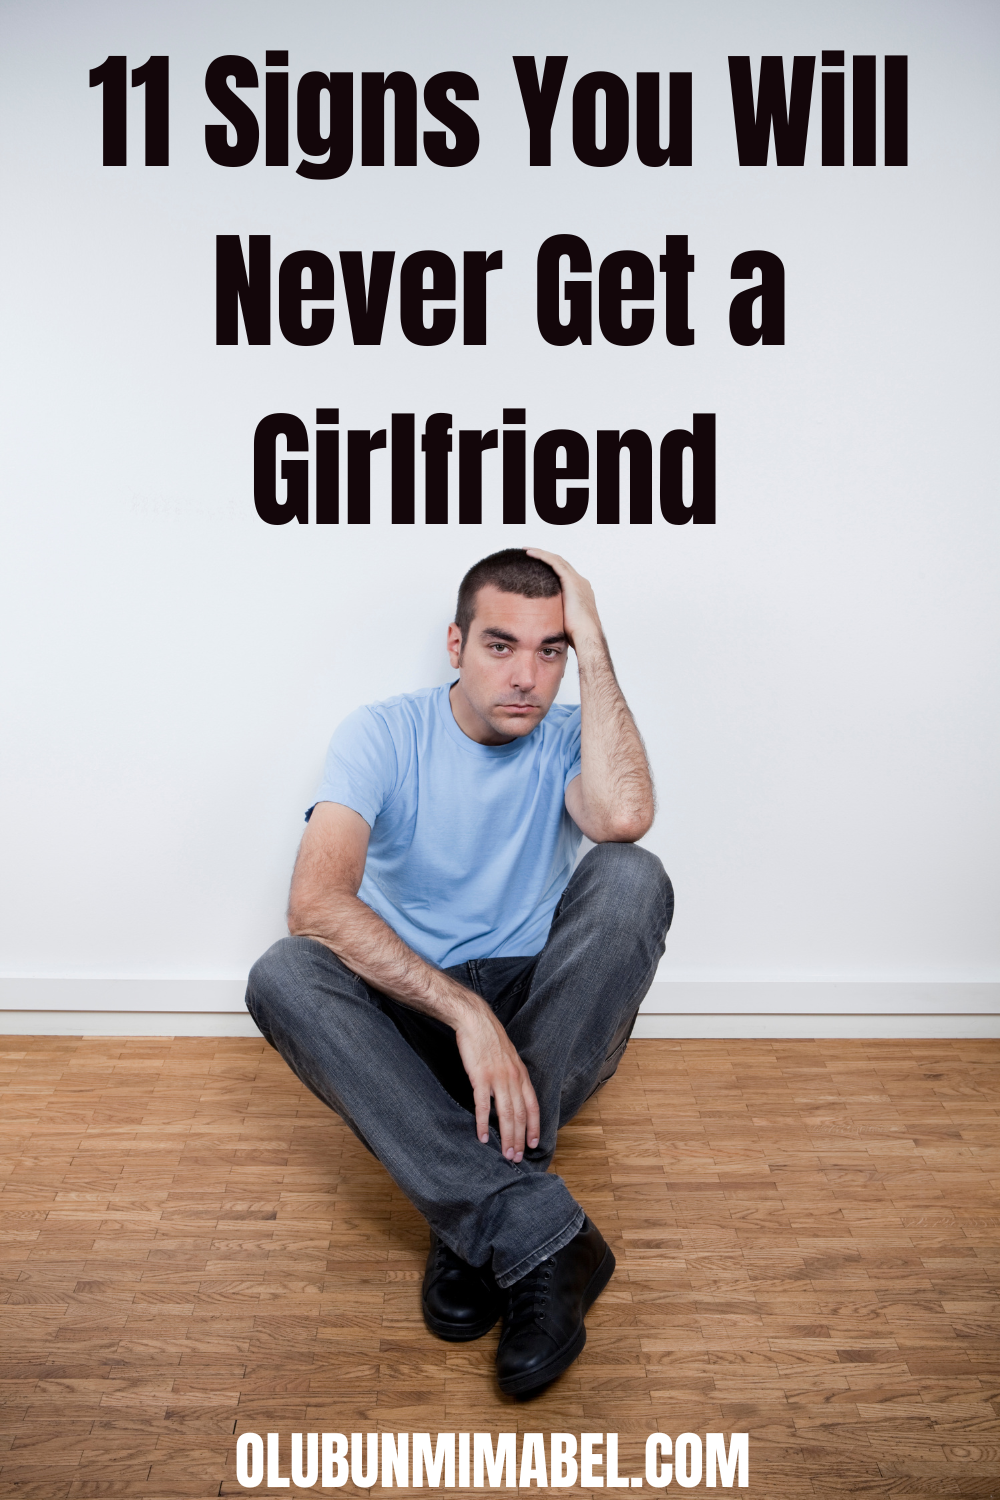 Signs You Will Never Get a Girlfriend